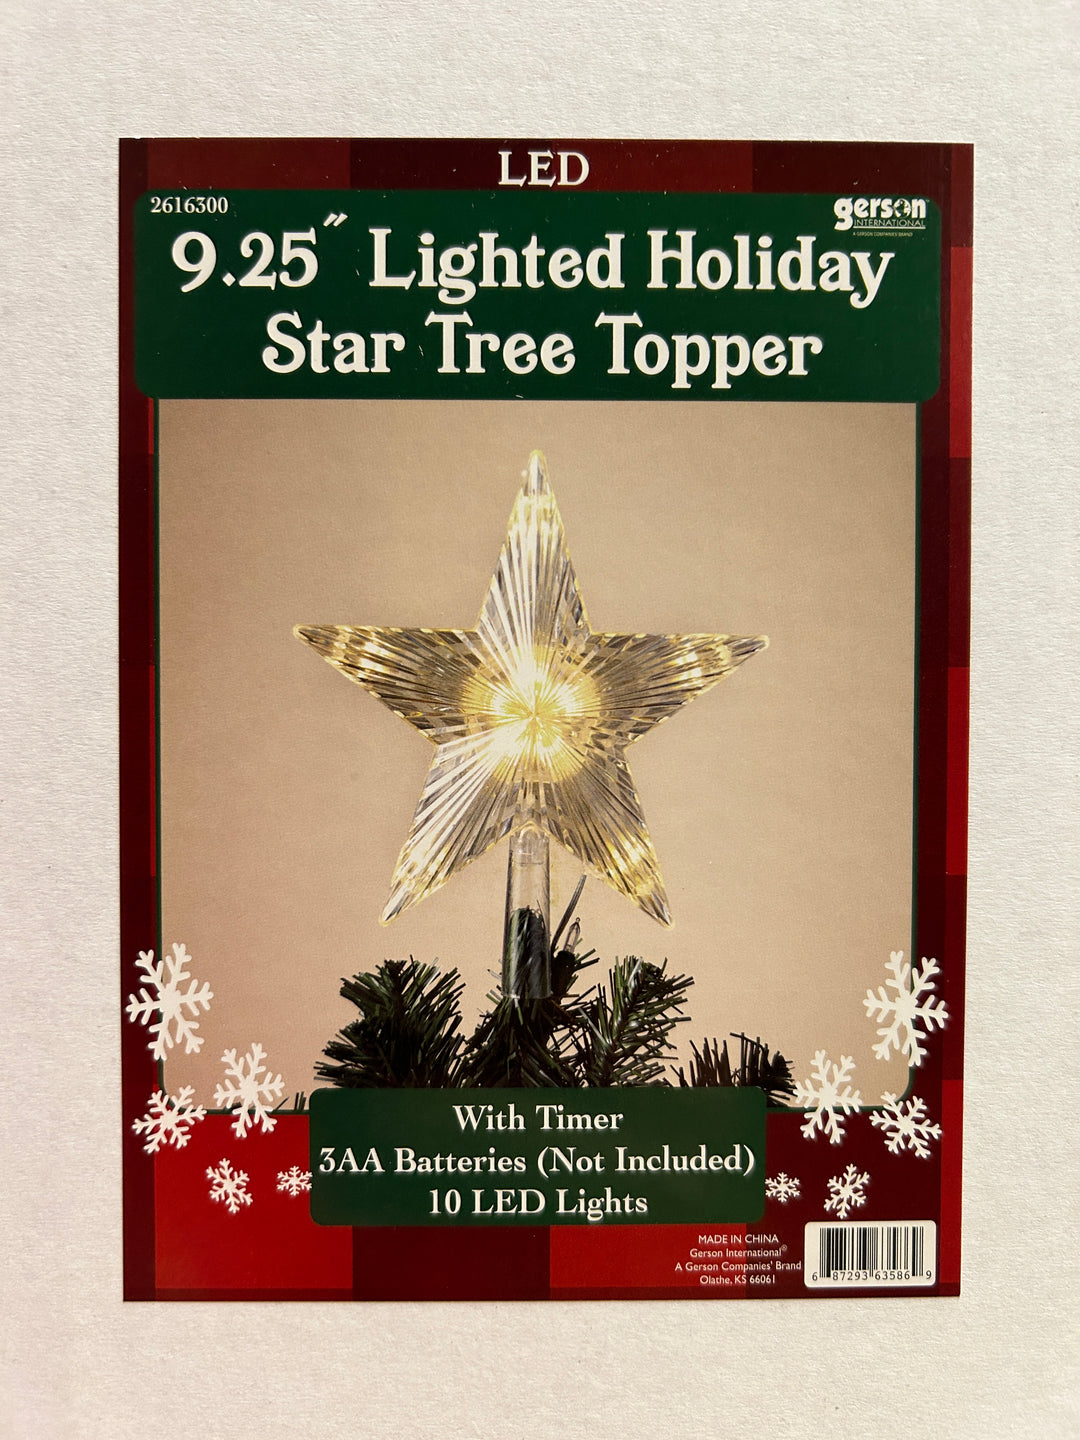 Lighted Holiday Star Tree Topper